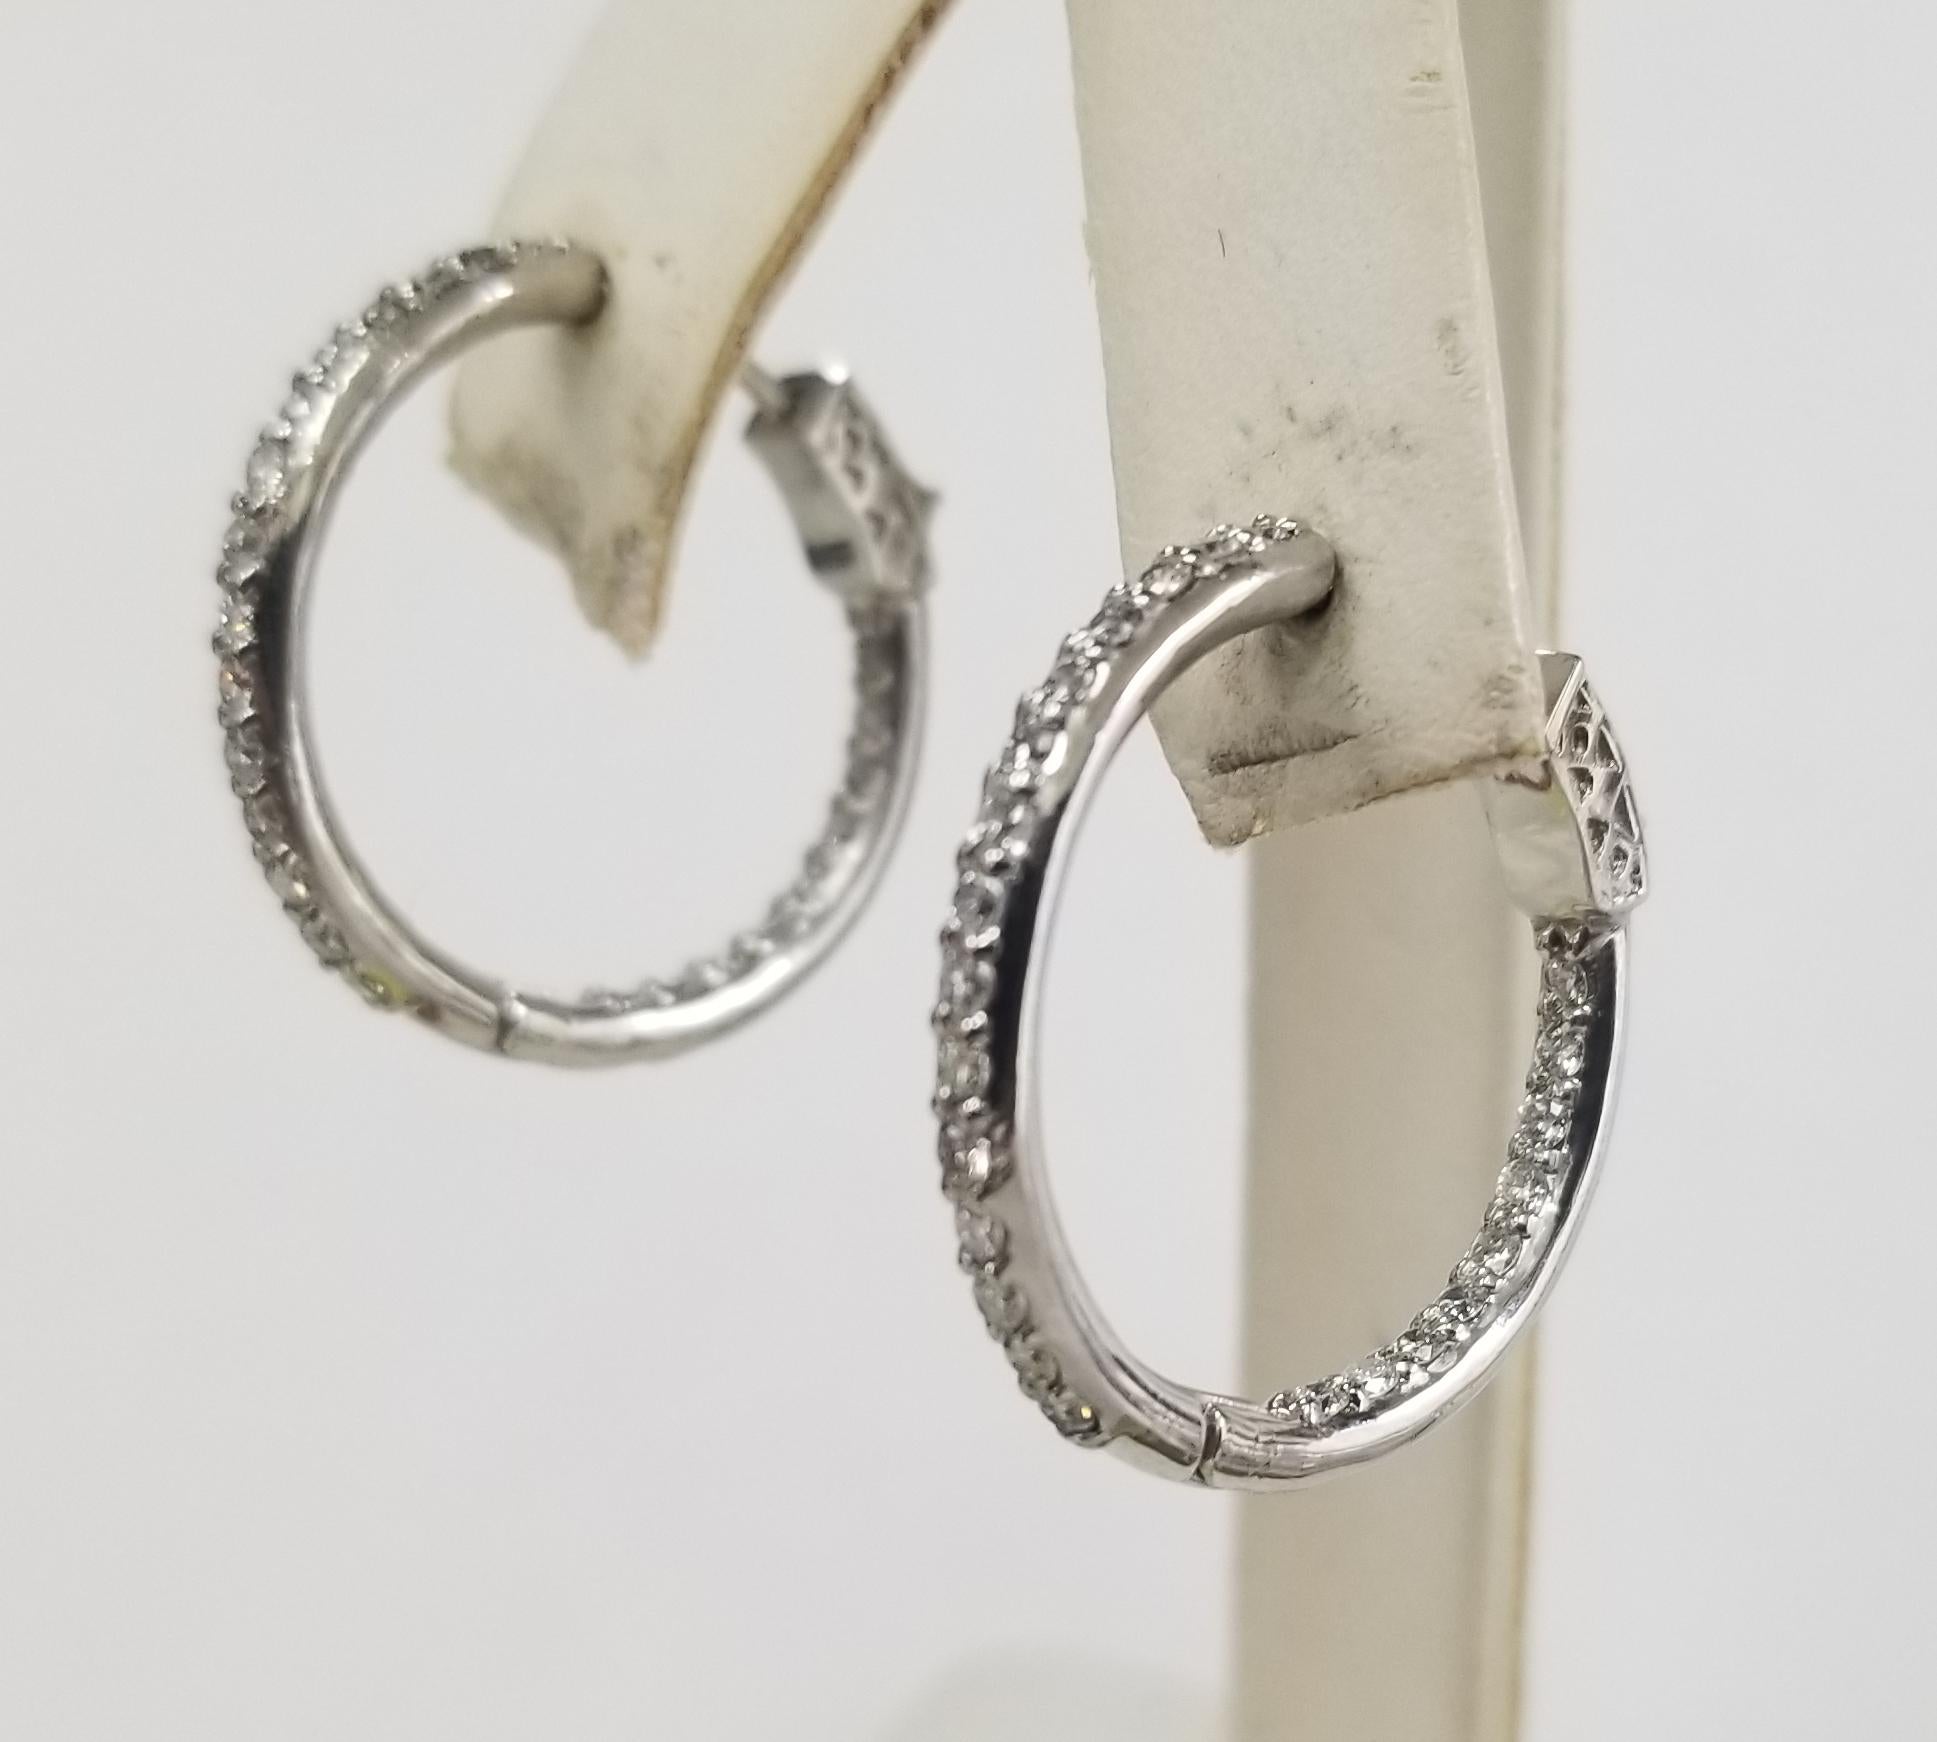 14k white gold 1 inch hoop diamond earrings, containing 48 round full cut diamonds of very fine quality weighing .80cts.